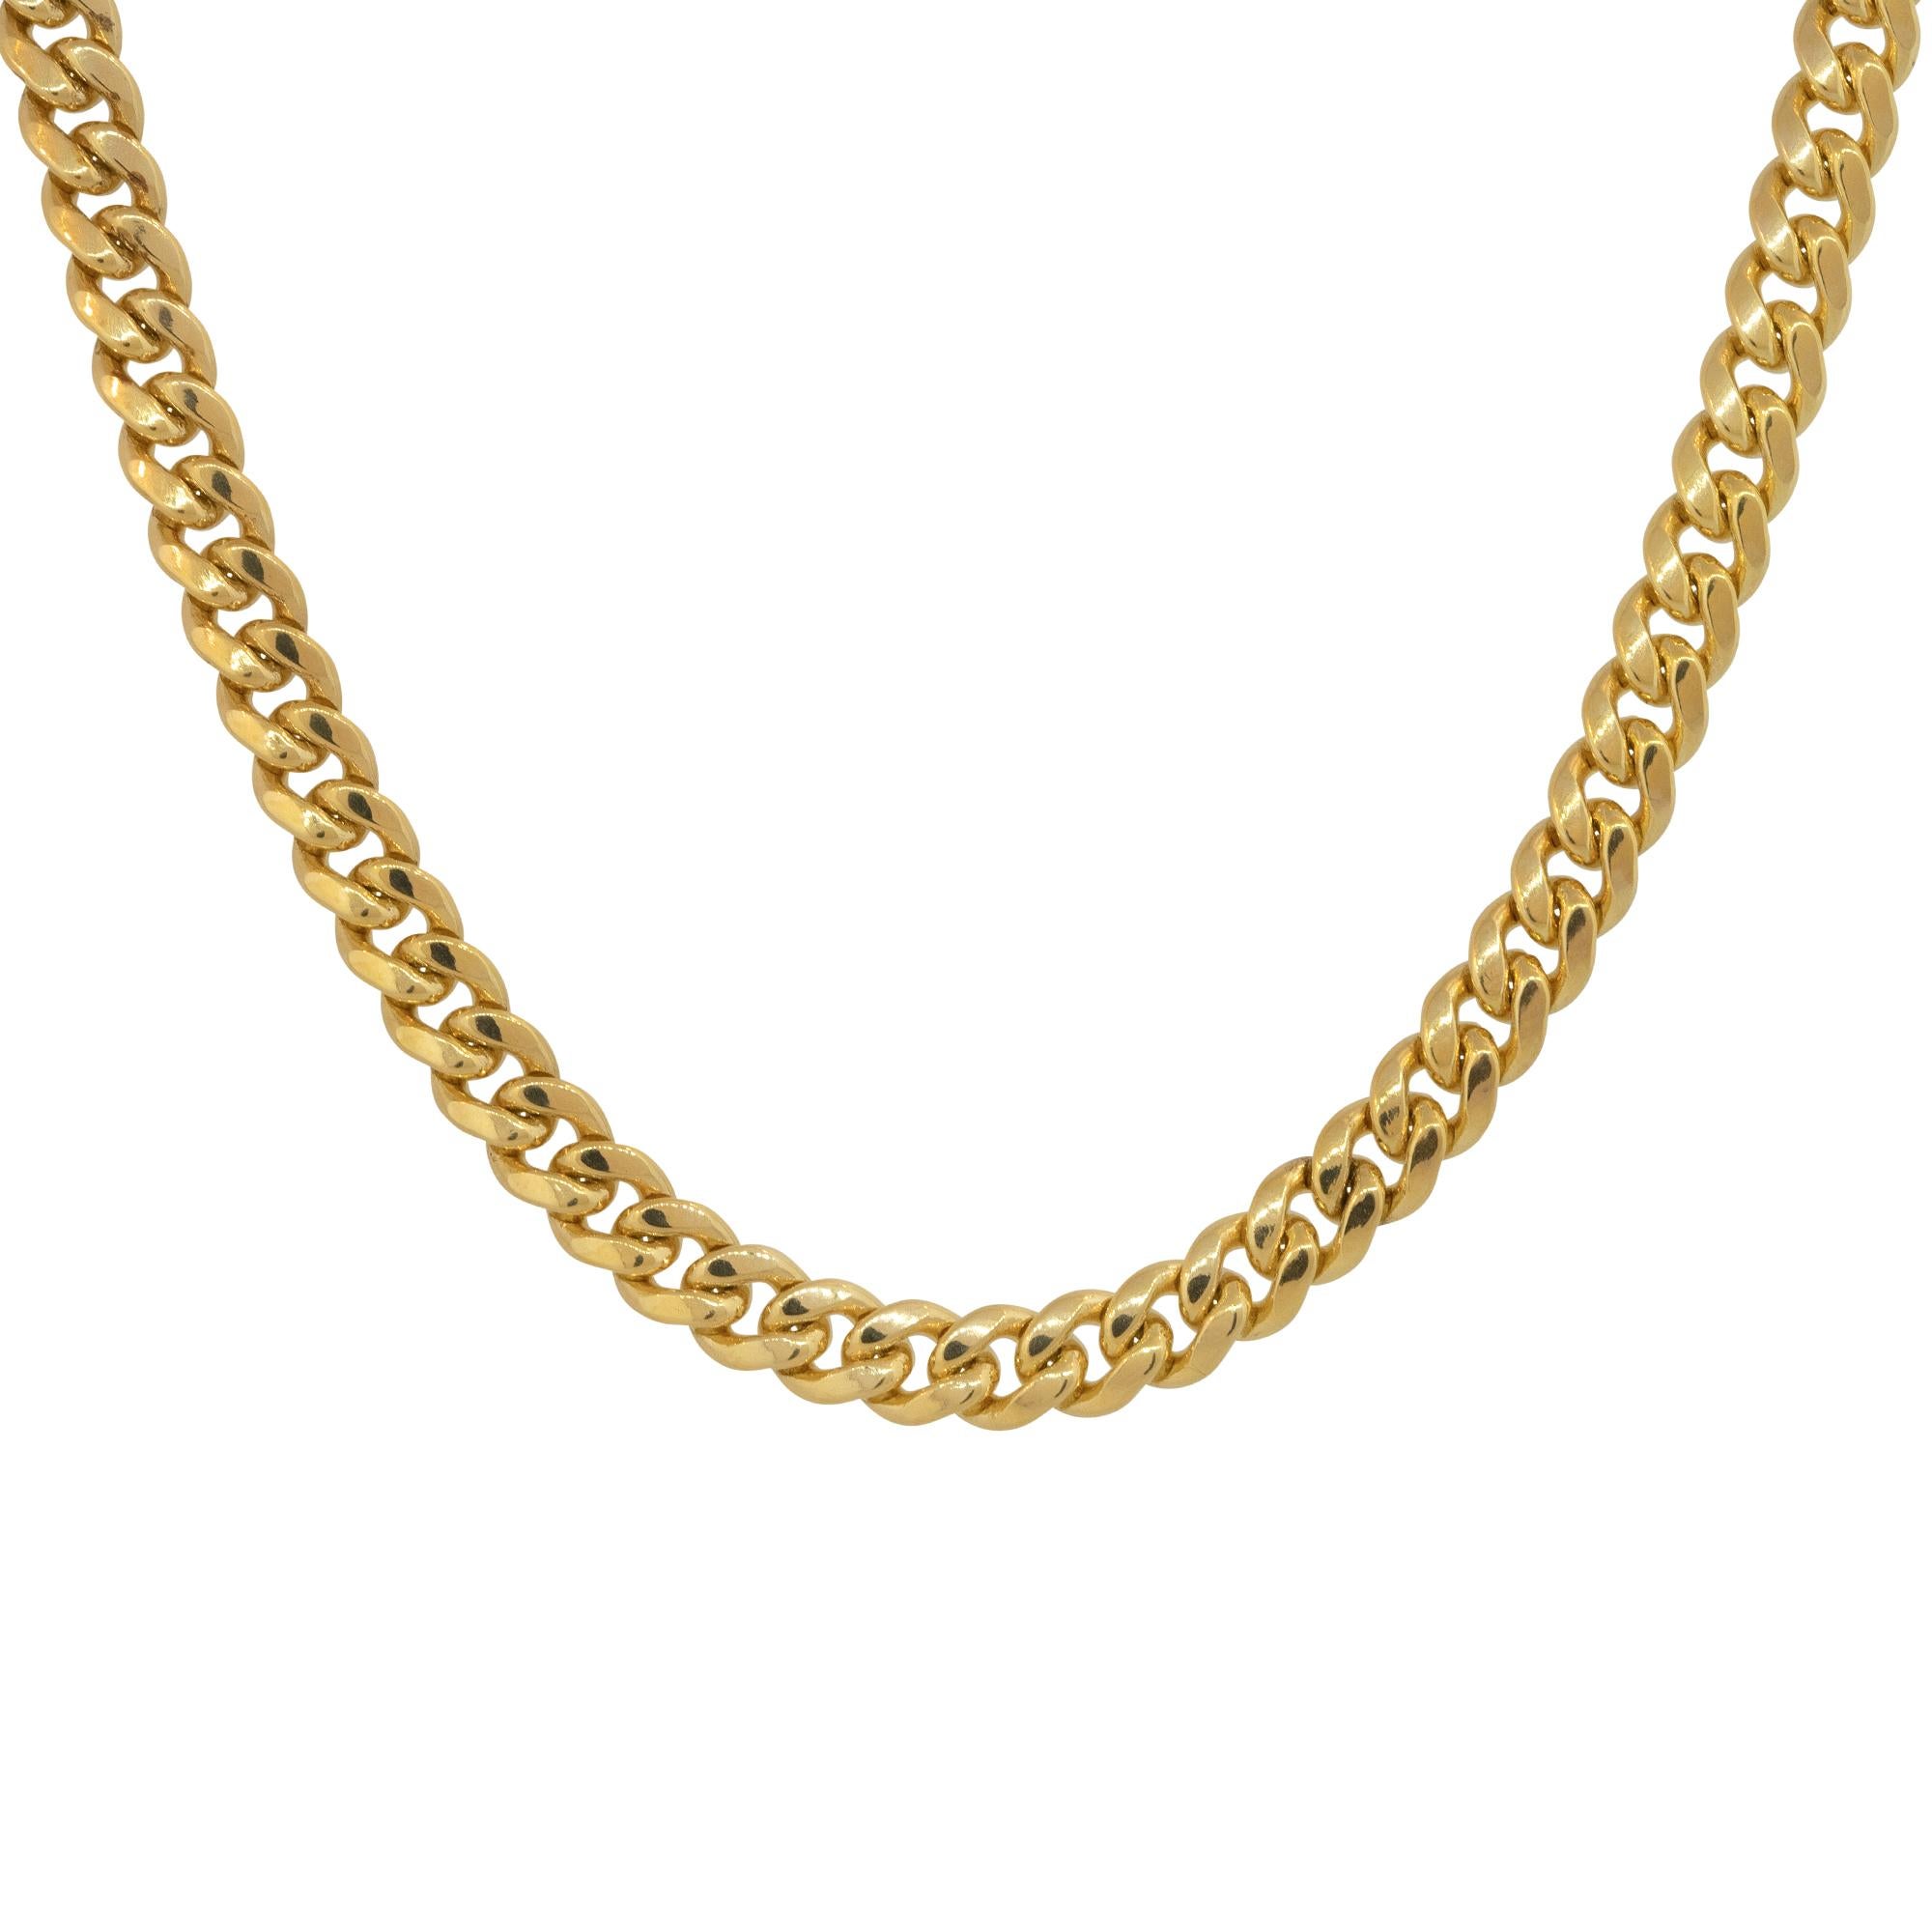 14k Yellow Gold 24″ Men's Miami Cuban Link Chain

Material: 14k Yellow Gold
Measurements: Necklace Measures 24″ in Length and 6mm in Thickness
Fastening: Spring Ring Clasp
Item Weight: 64g (41.1dwt)
Additional Details: This item comes with a